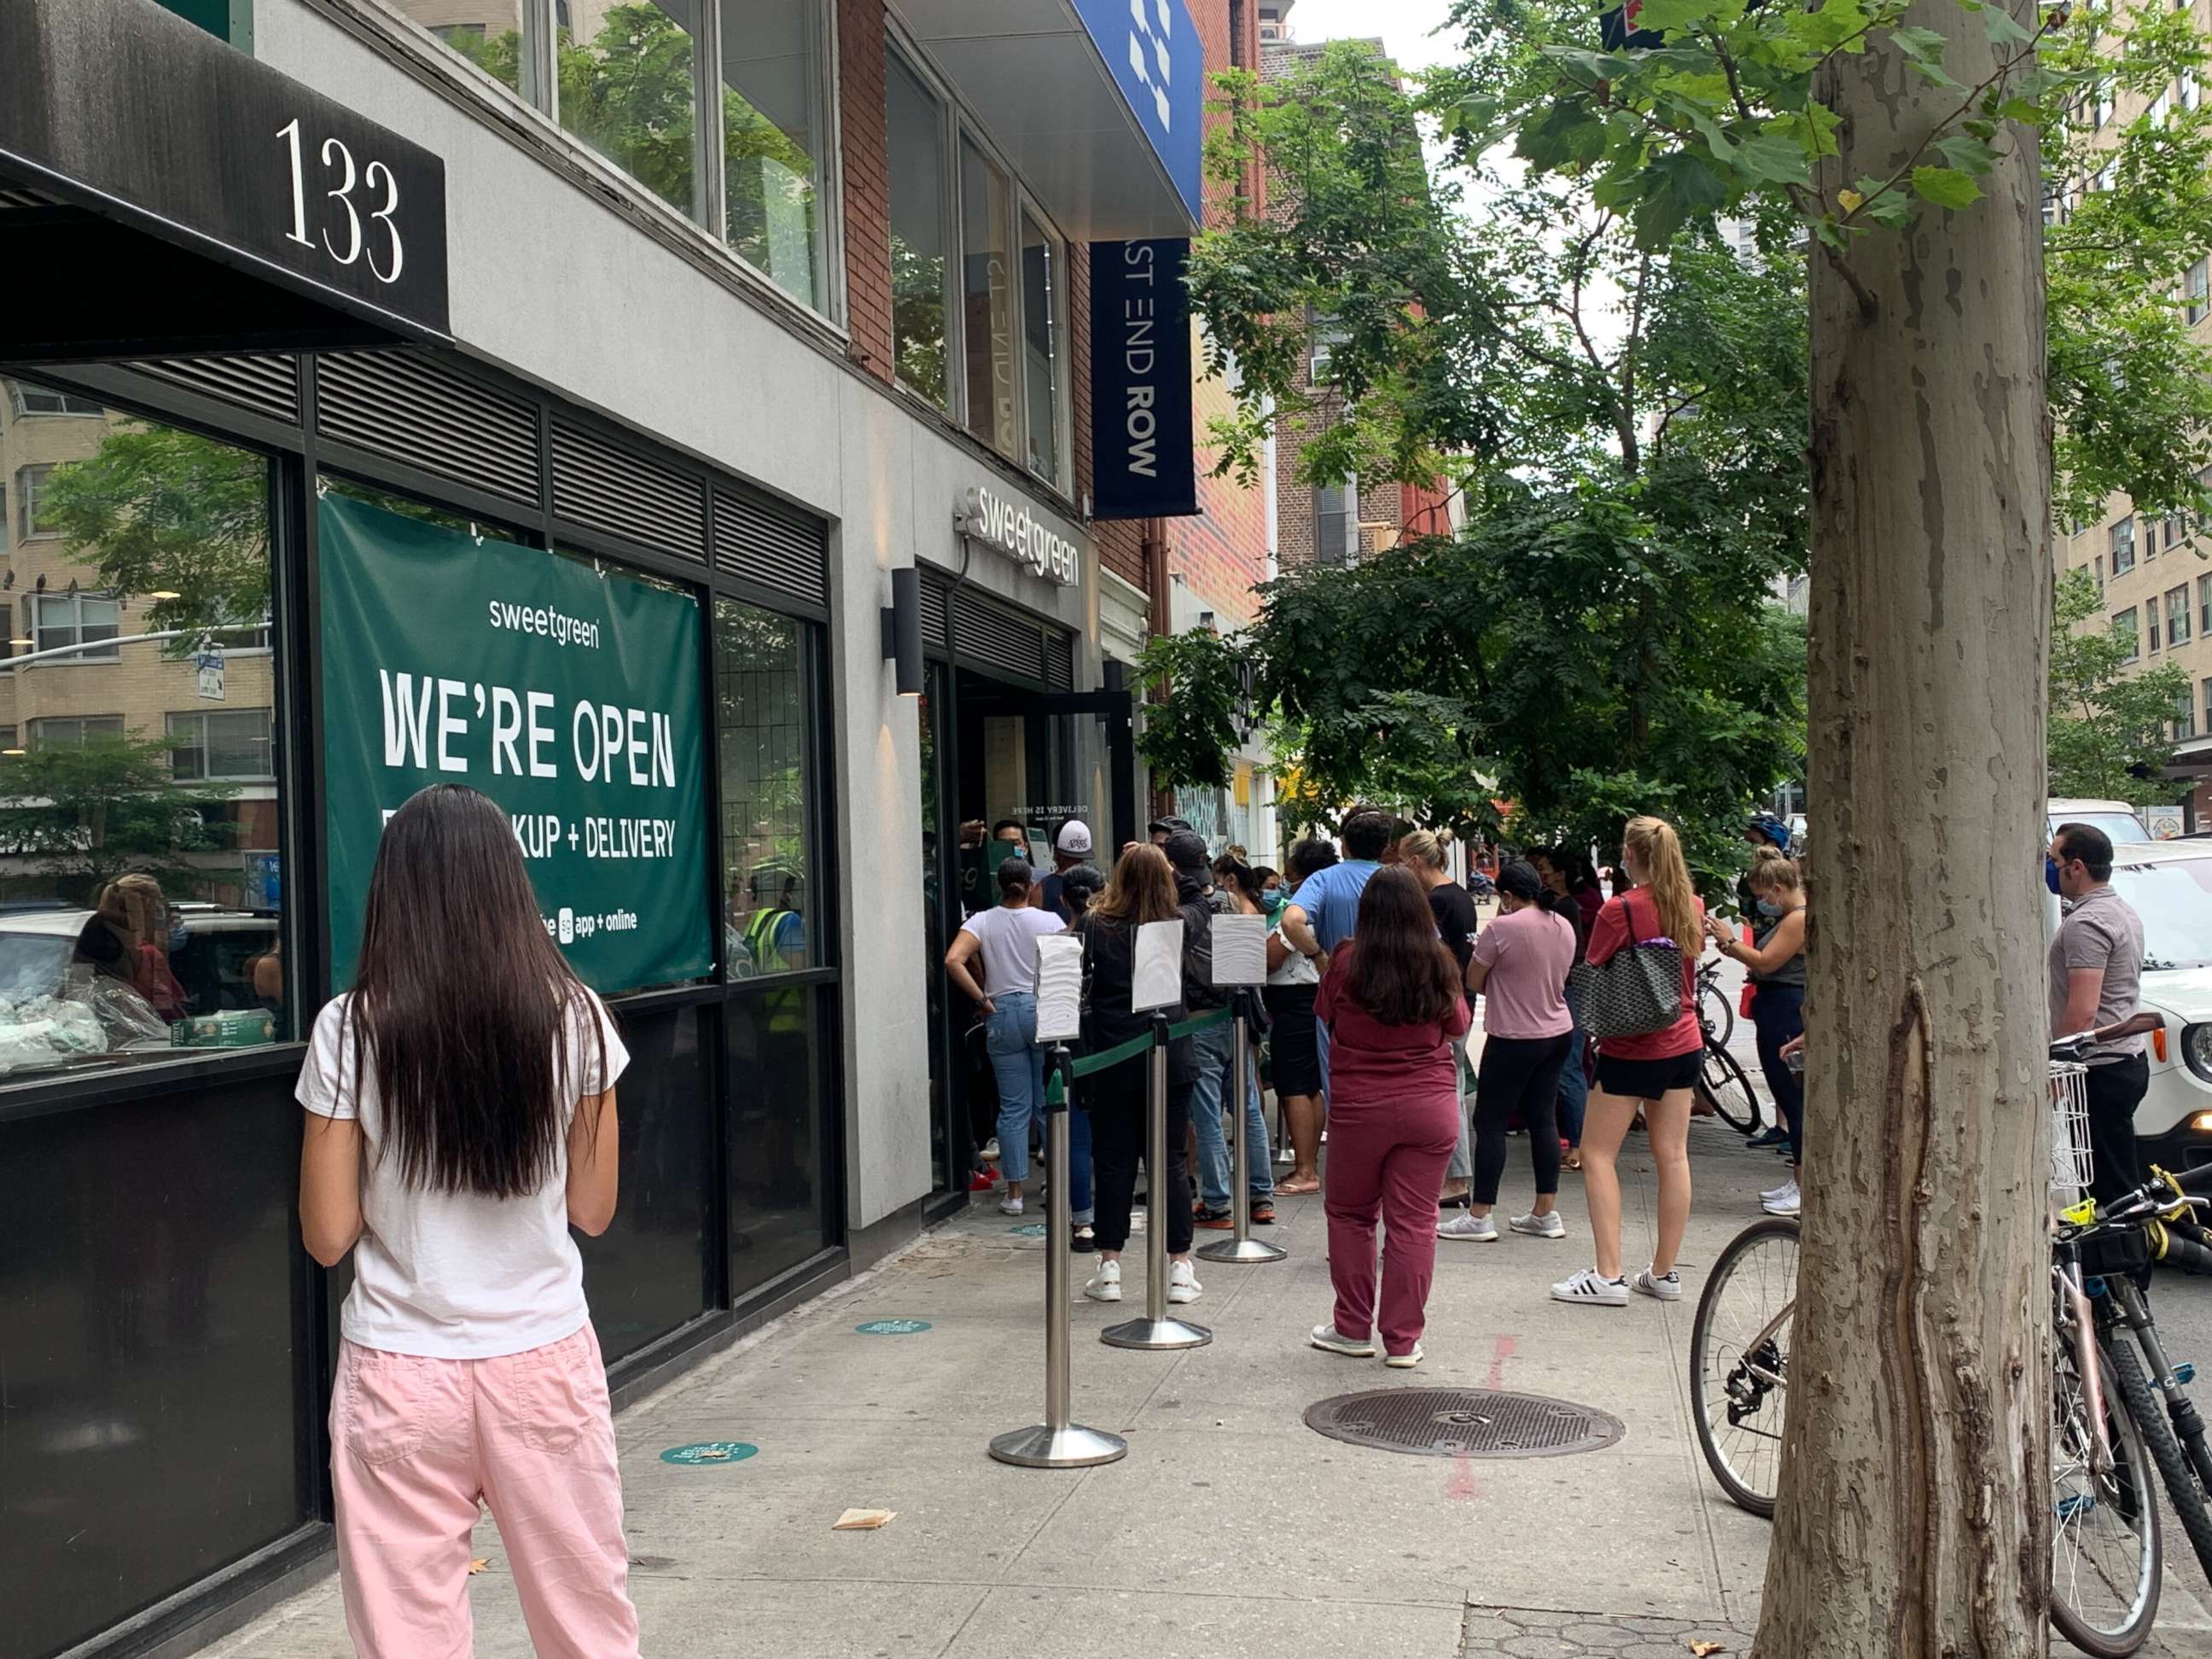 PHOTO: Customers queued up at Sweet Green restaurant on July 8, 2020.